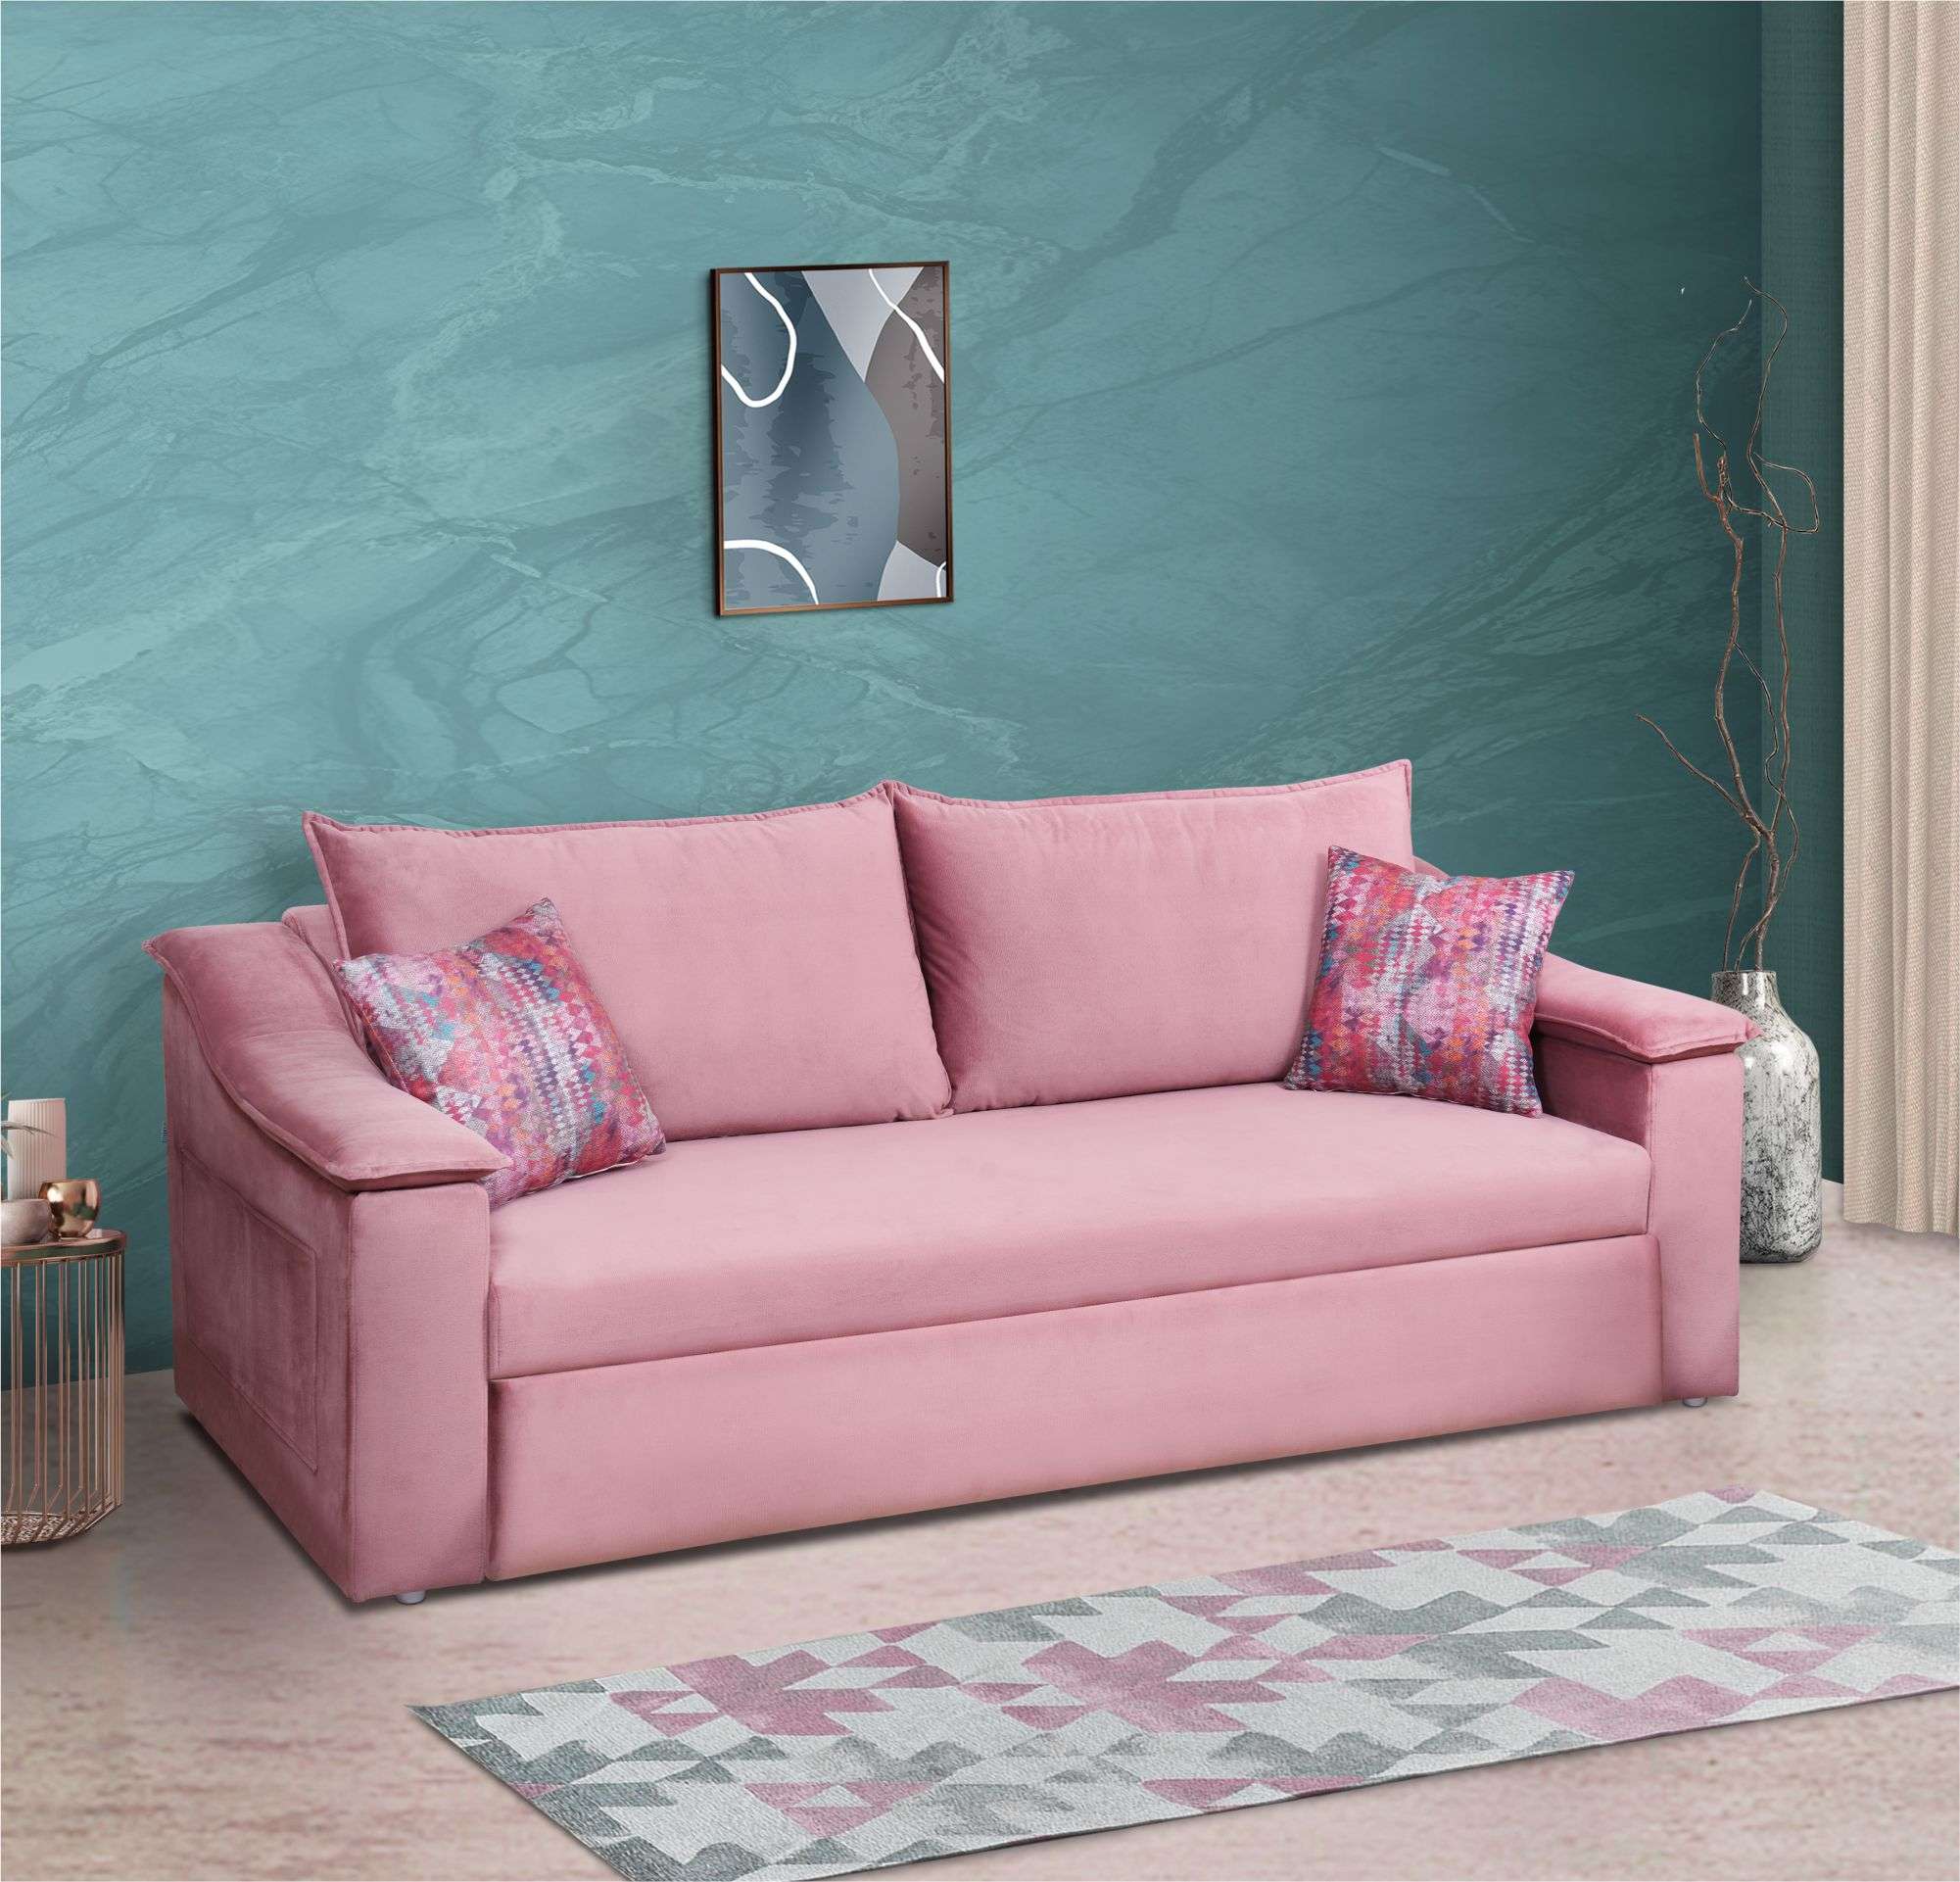 LVESCBWR003-Wrangler Three seater sofa bed with Two Pillows-Blush Pink